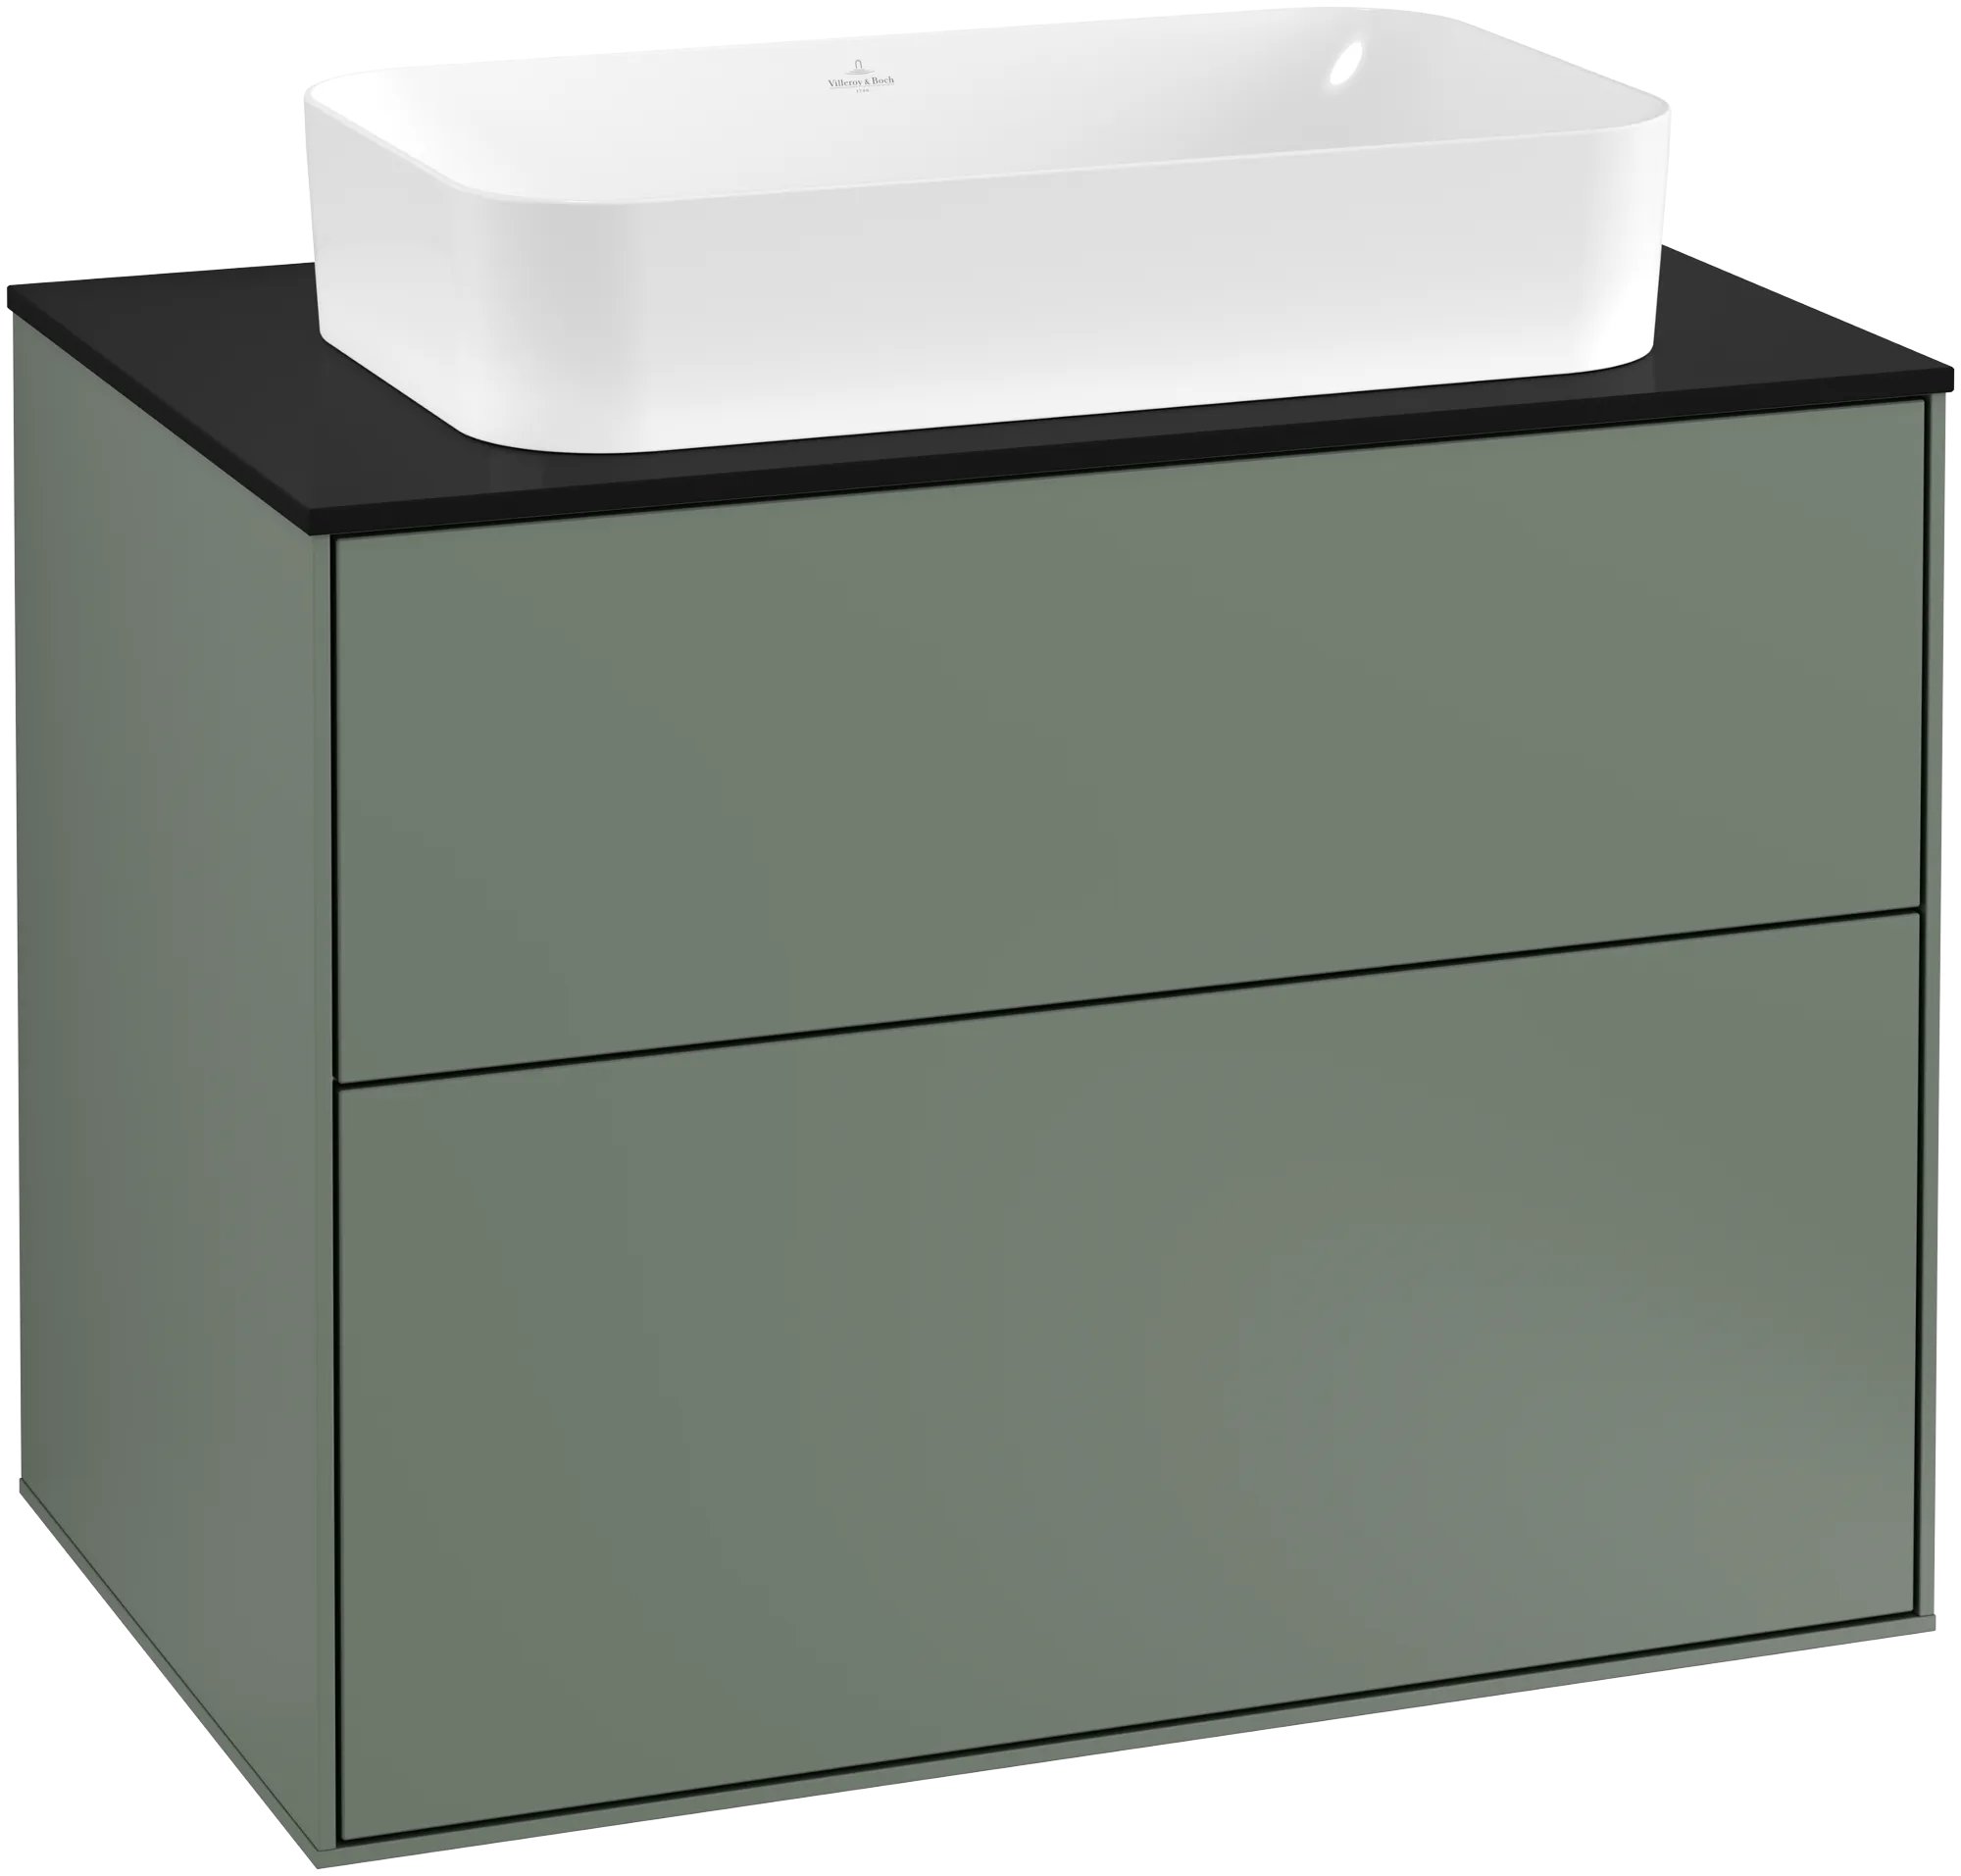 Picture of VILLEROY BOCH Finion Vanity unit, with lighting, 2 pull-out compartments, 800 x 603 x 501 mm, Olive Matt Lacquer / Glass Black Matt #G22200GM